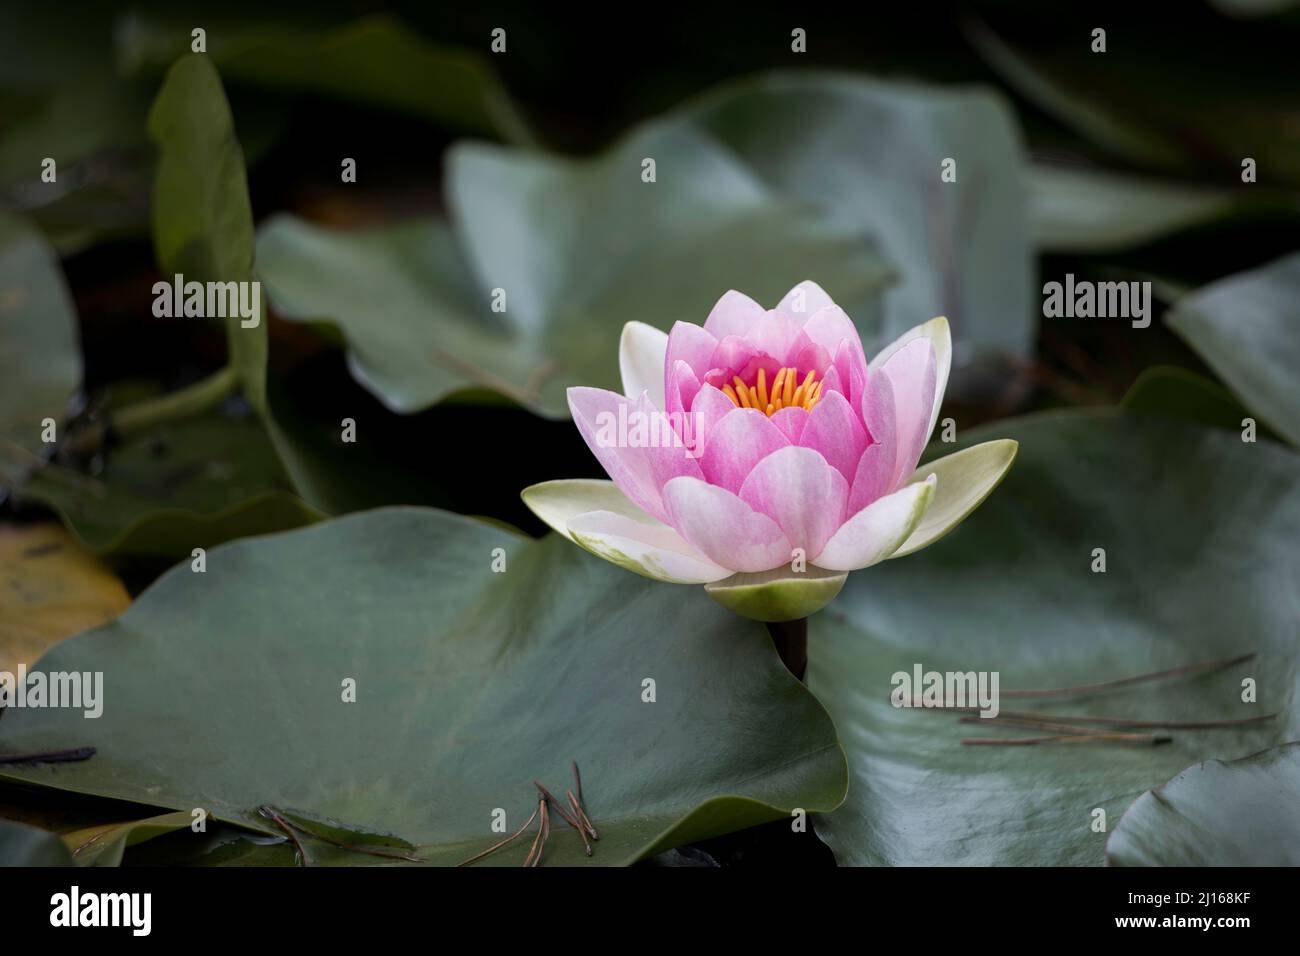 Closeup of one large pink water lily growing on the water surrounded by deep green leaves Stock Photo